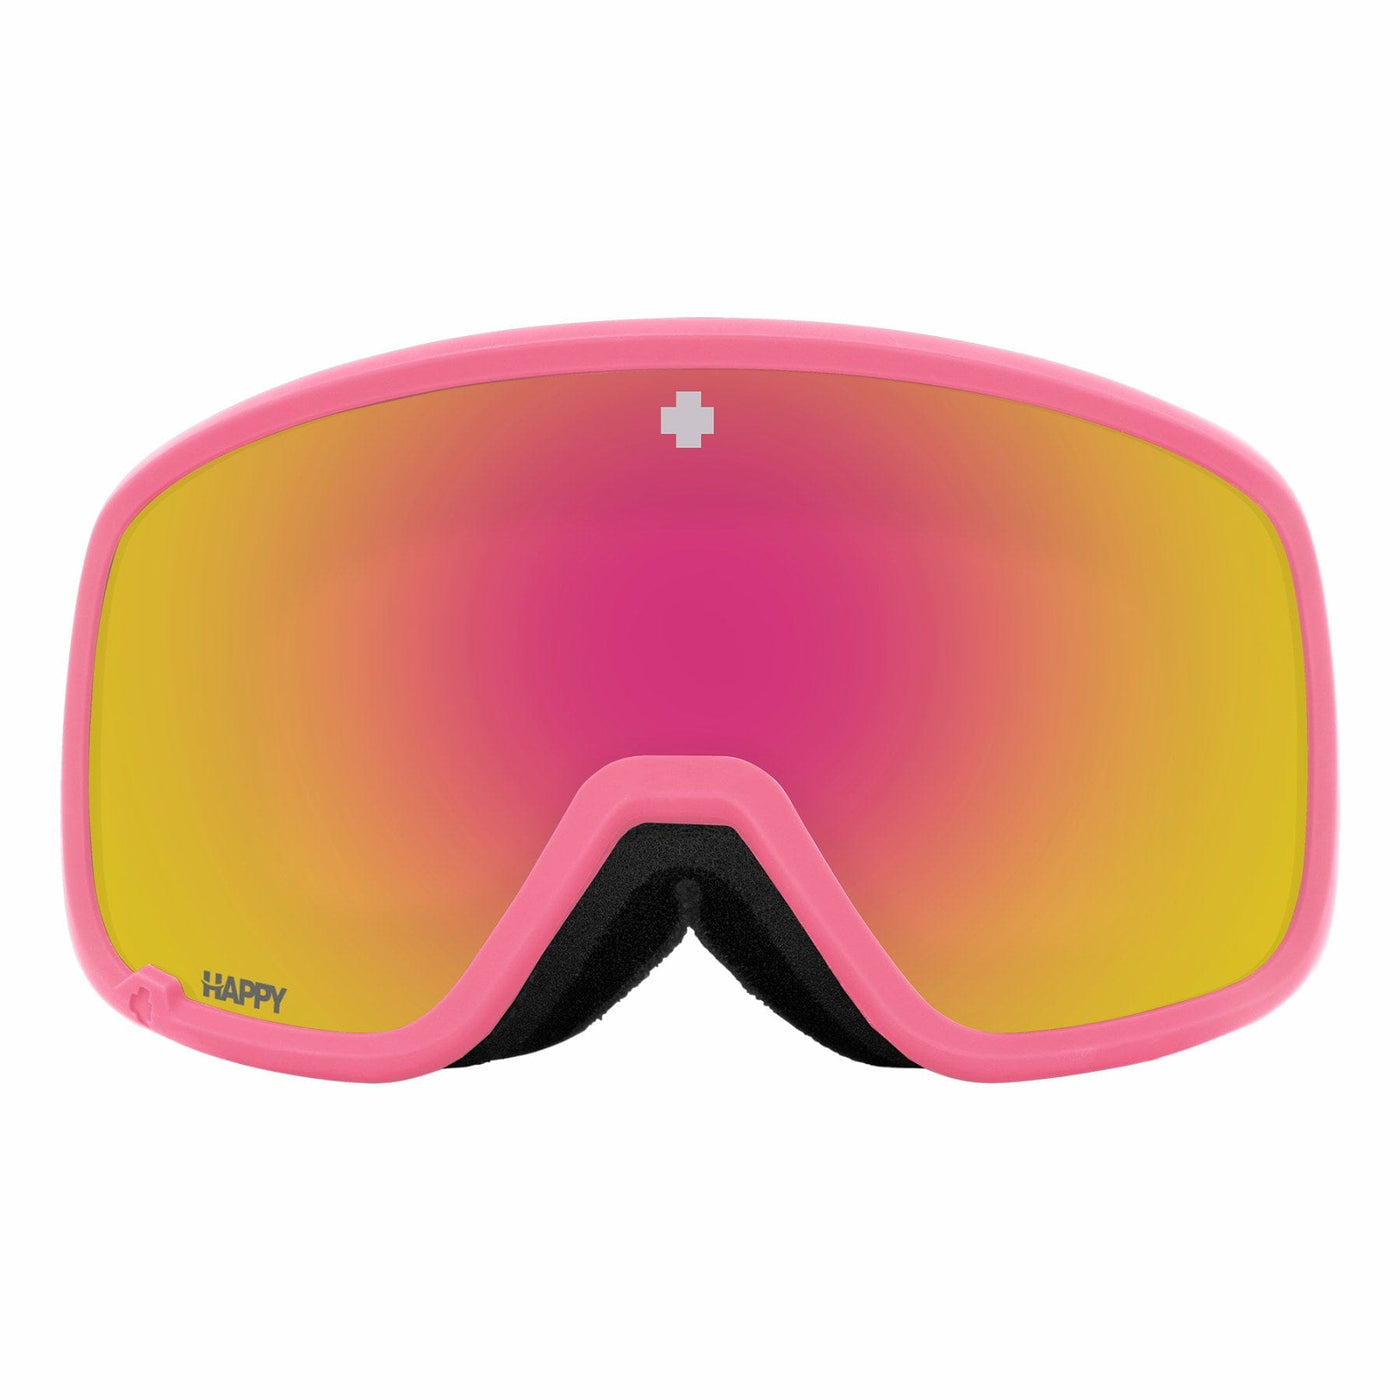 SPY goggles happy lens replacement - pink